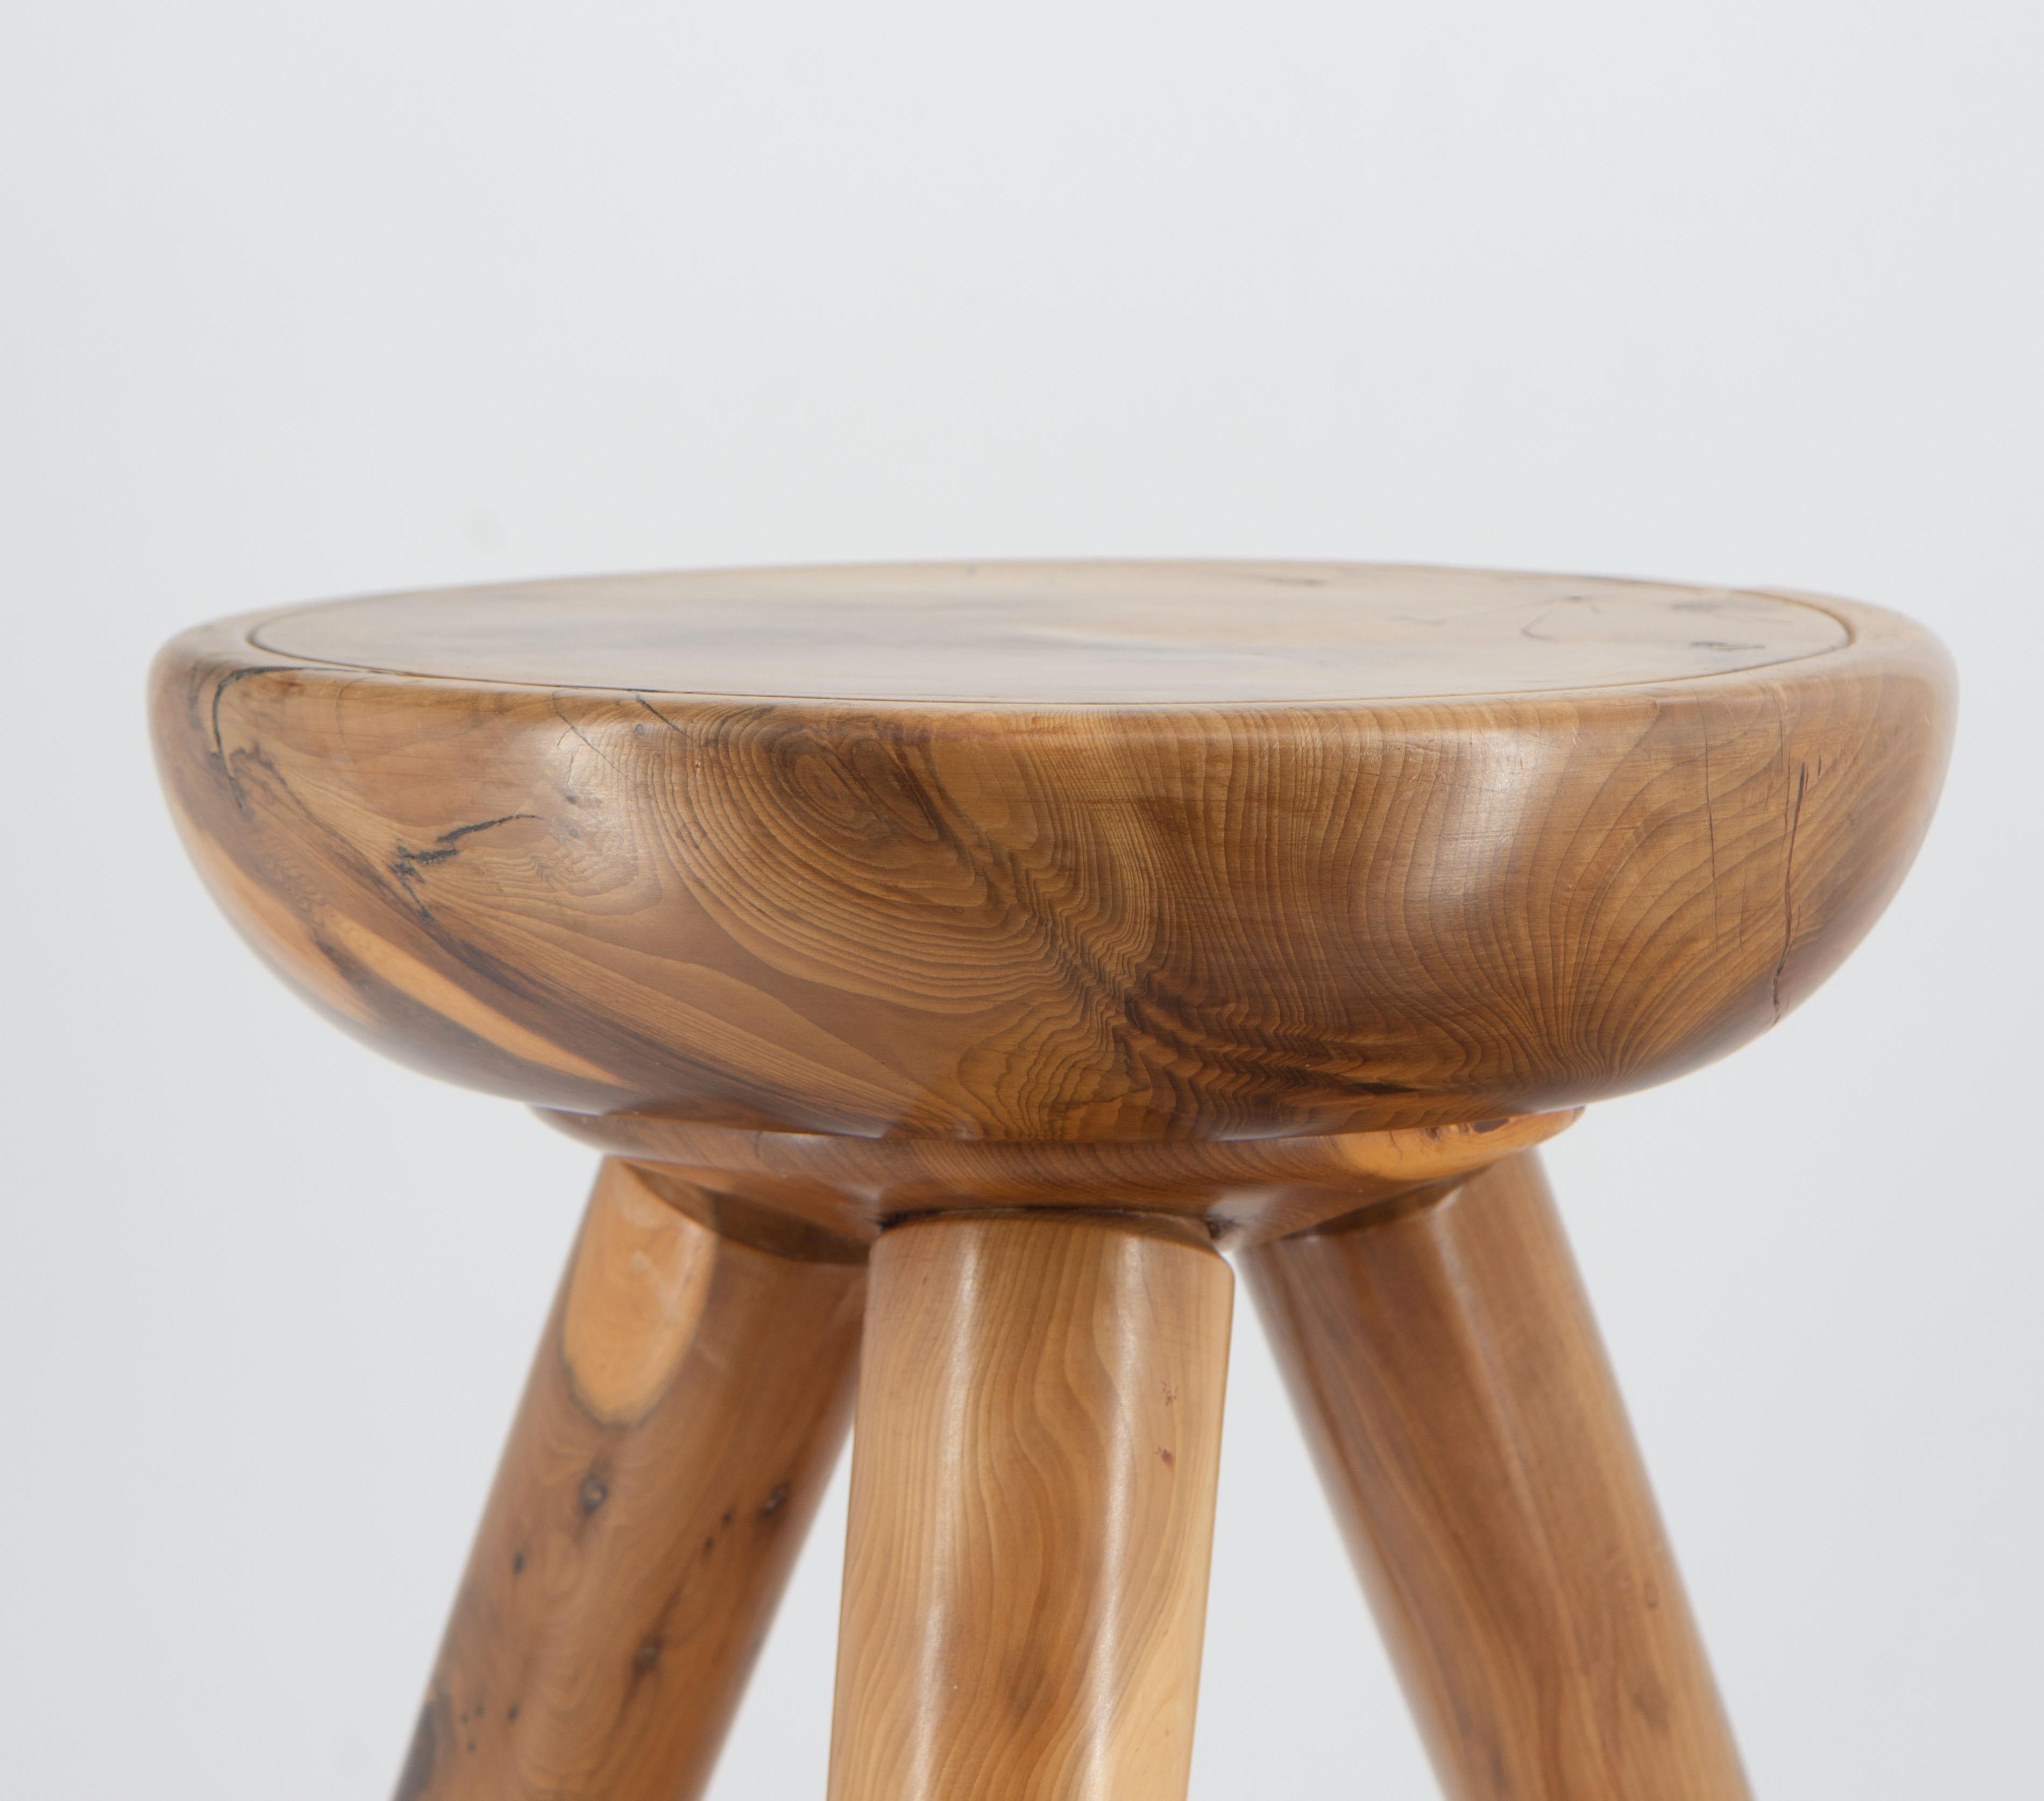 A charming midcentury yew alpine inspired low table/stool, in a Charlotte Perriand manner. circa 1960.

Very tactile feel, made in solid yew and showing wonderful grain and natural shakes in the wood. It is very sturdy and has no loose joints.